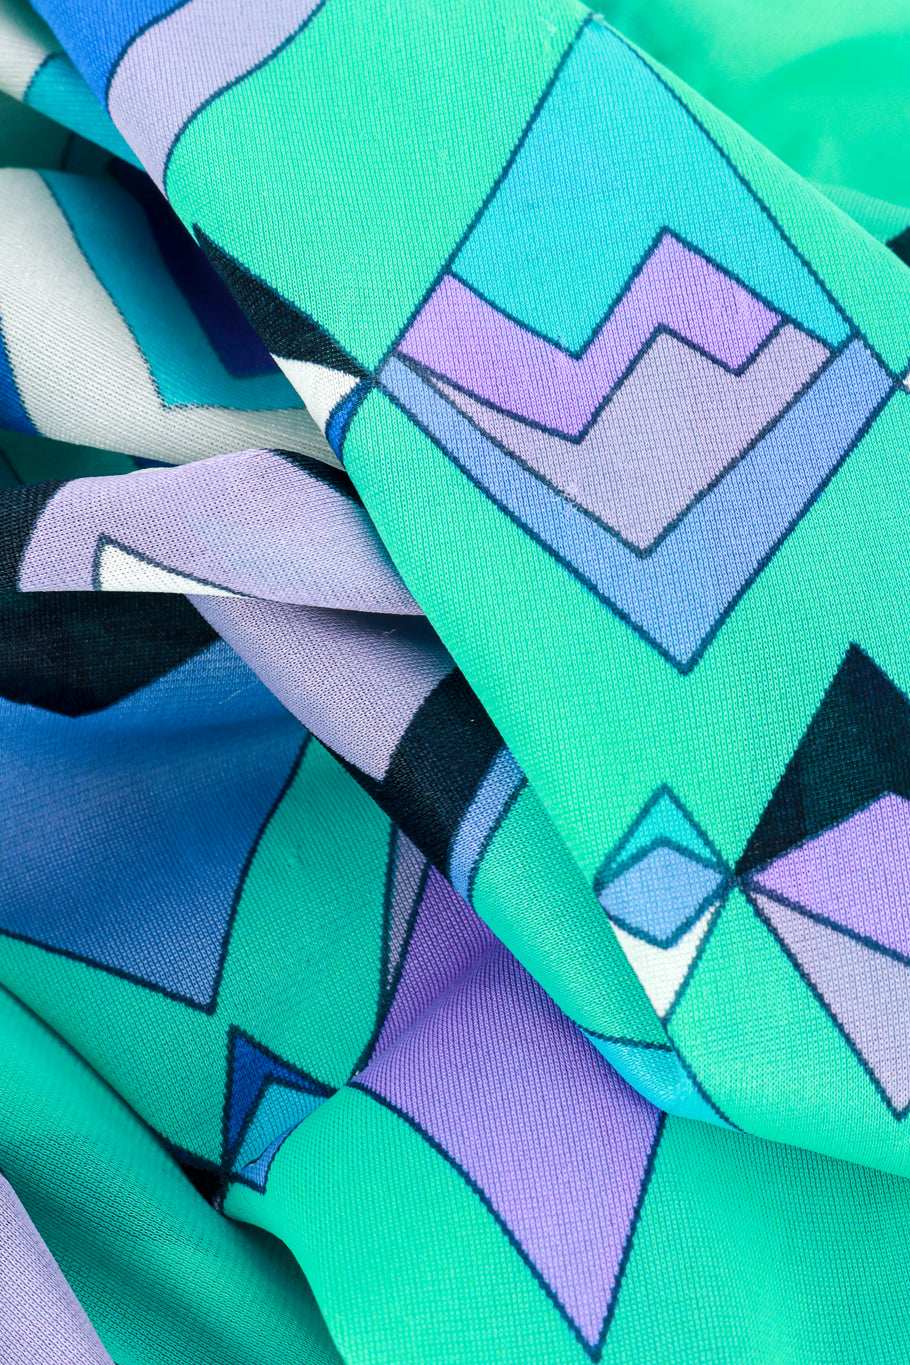 Vintage Emilio Pucci for Formfit Rogers teal purple and white geo chemise slip dress flat lay detail of the graphic print @Recess LA